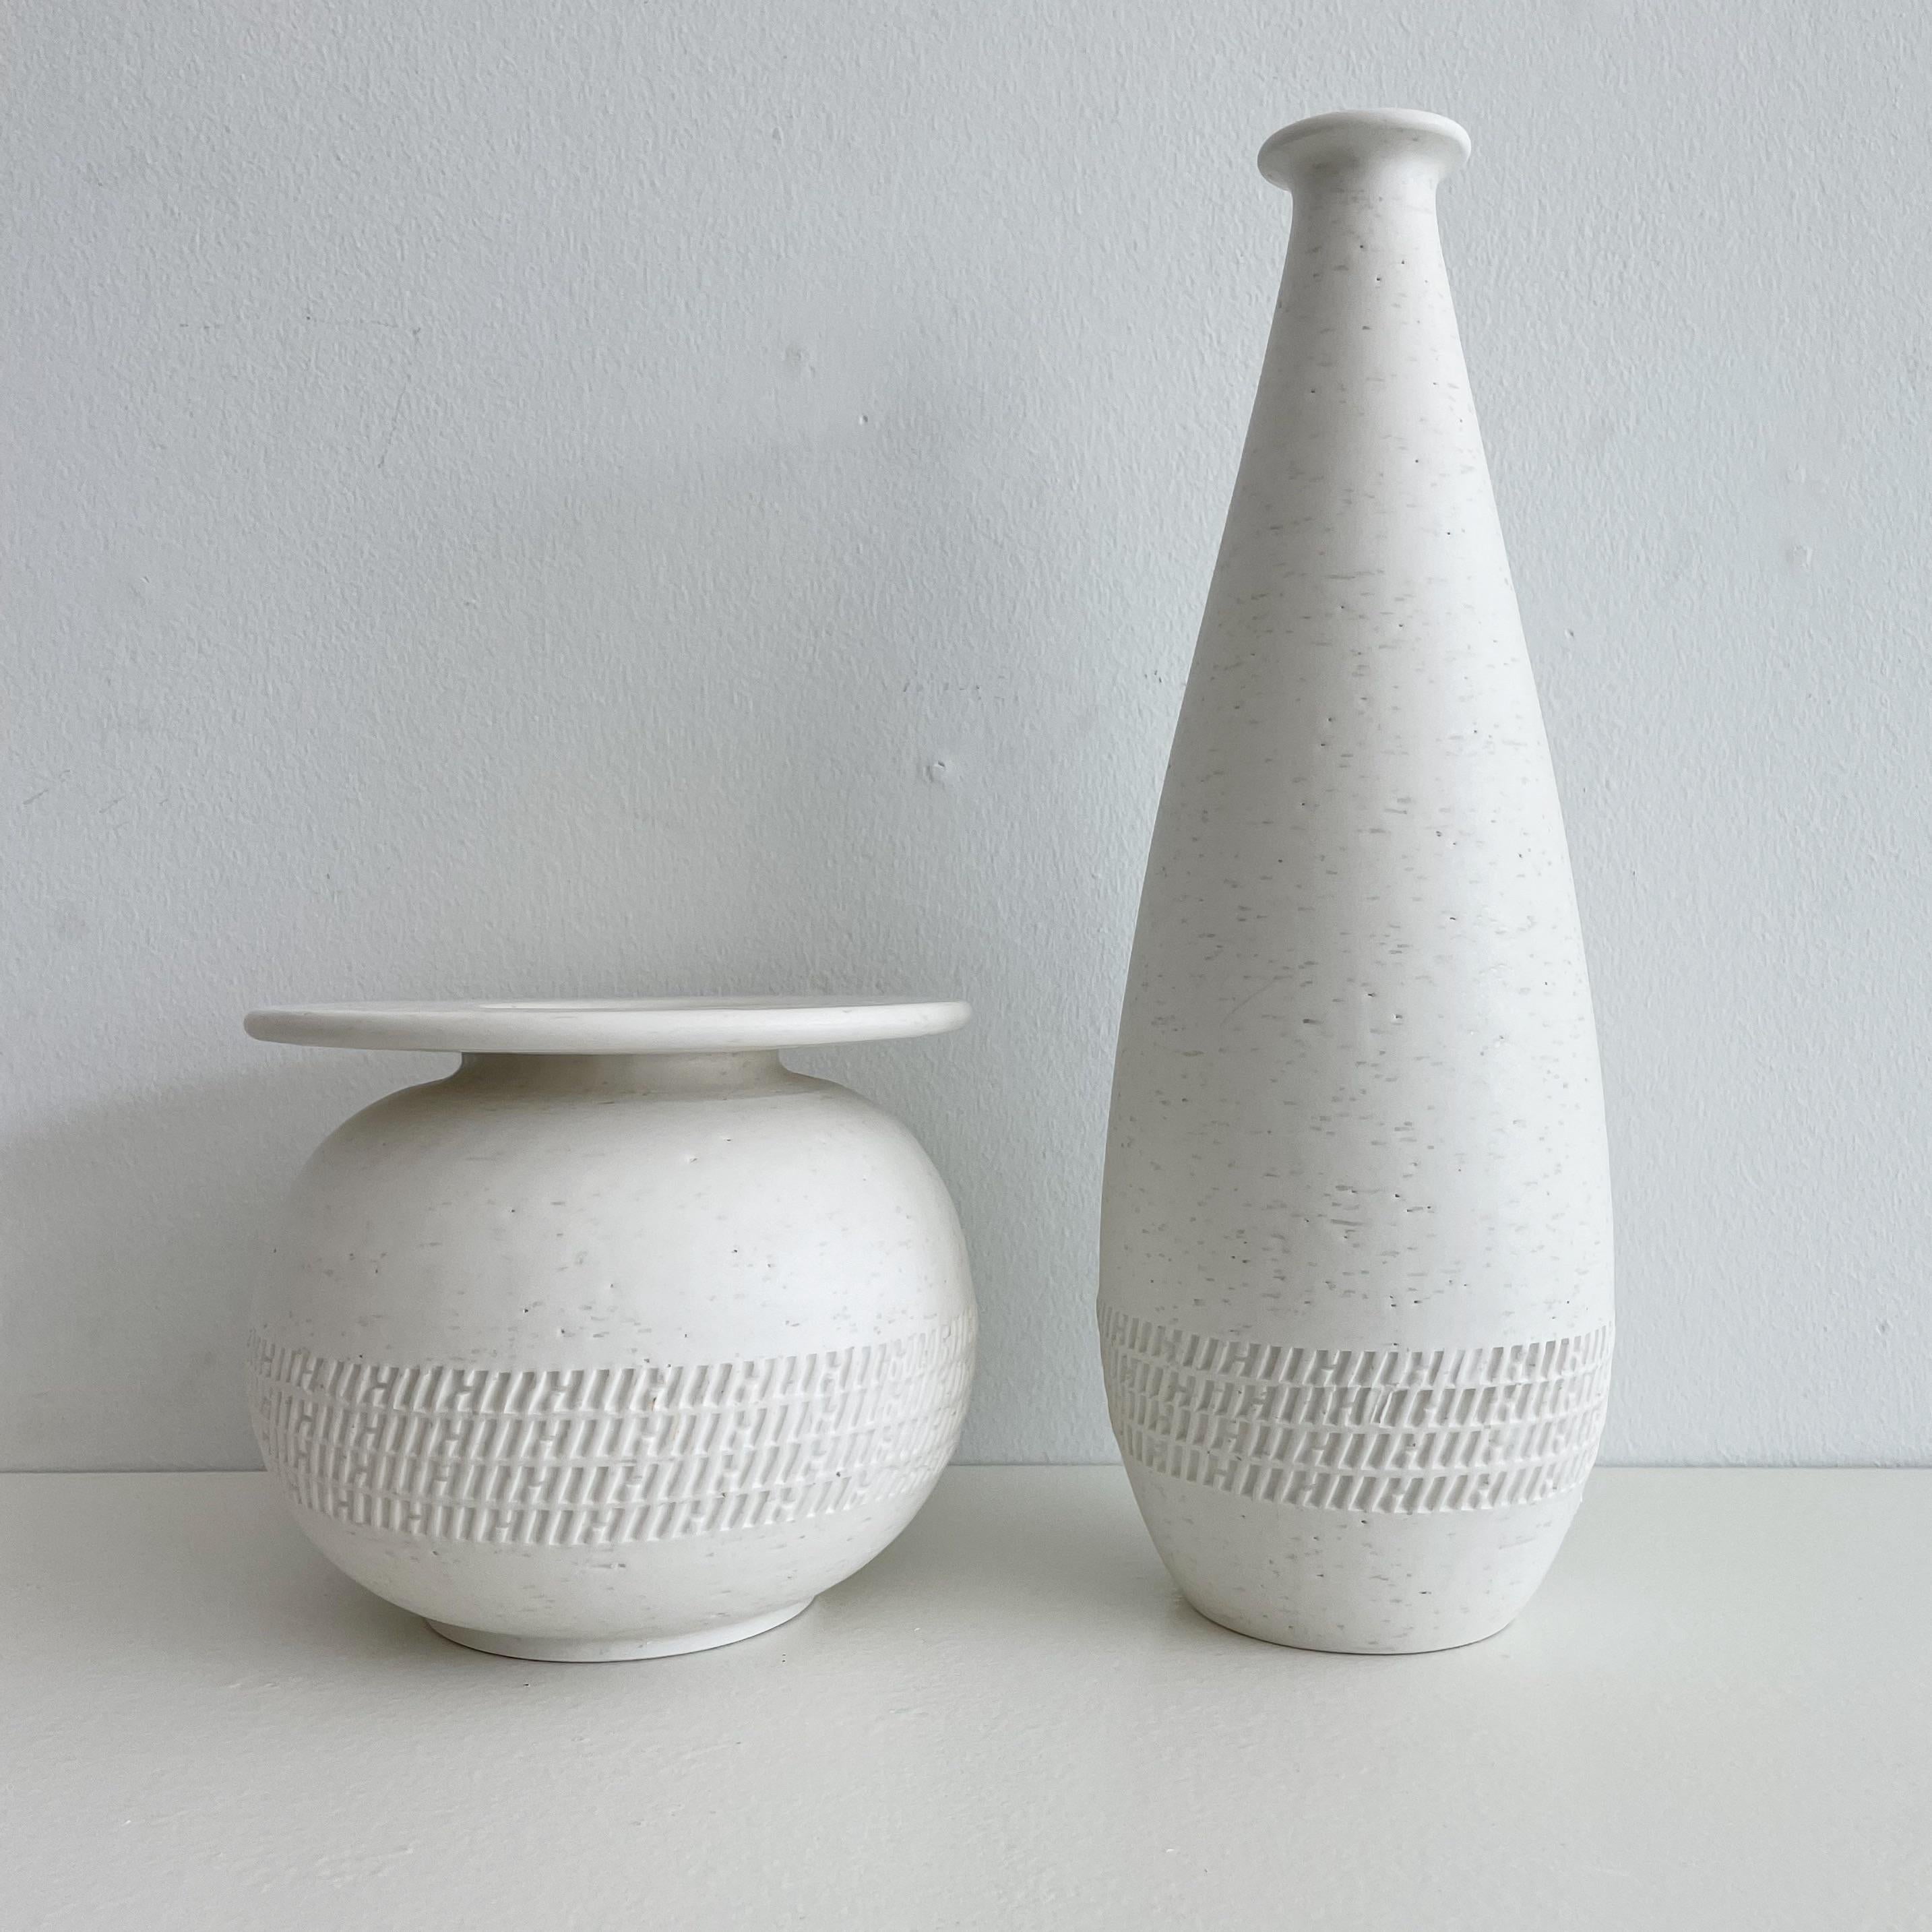 Pair of organic white vases with incised H's by Hermes Paris circa 2000. 
Smaller example measures: 7